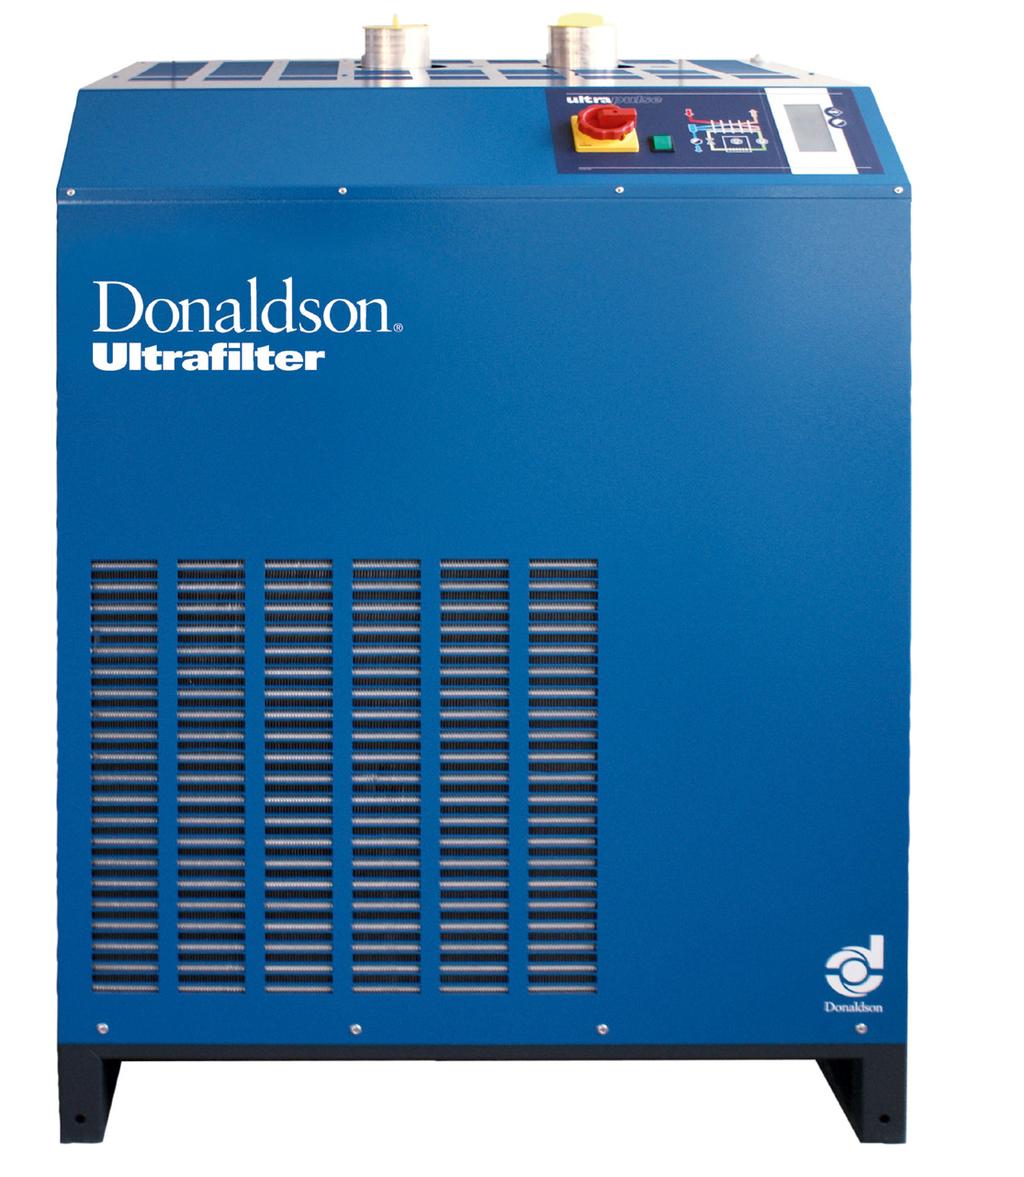 Technical Data Sheet: Refrigeration Compressed Air Dryers for volume flows from 0550 to 1650 m³/h The compressed air is being fed into the dryer and being pre-cooled in the air-to-air heat exchanger